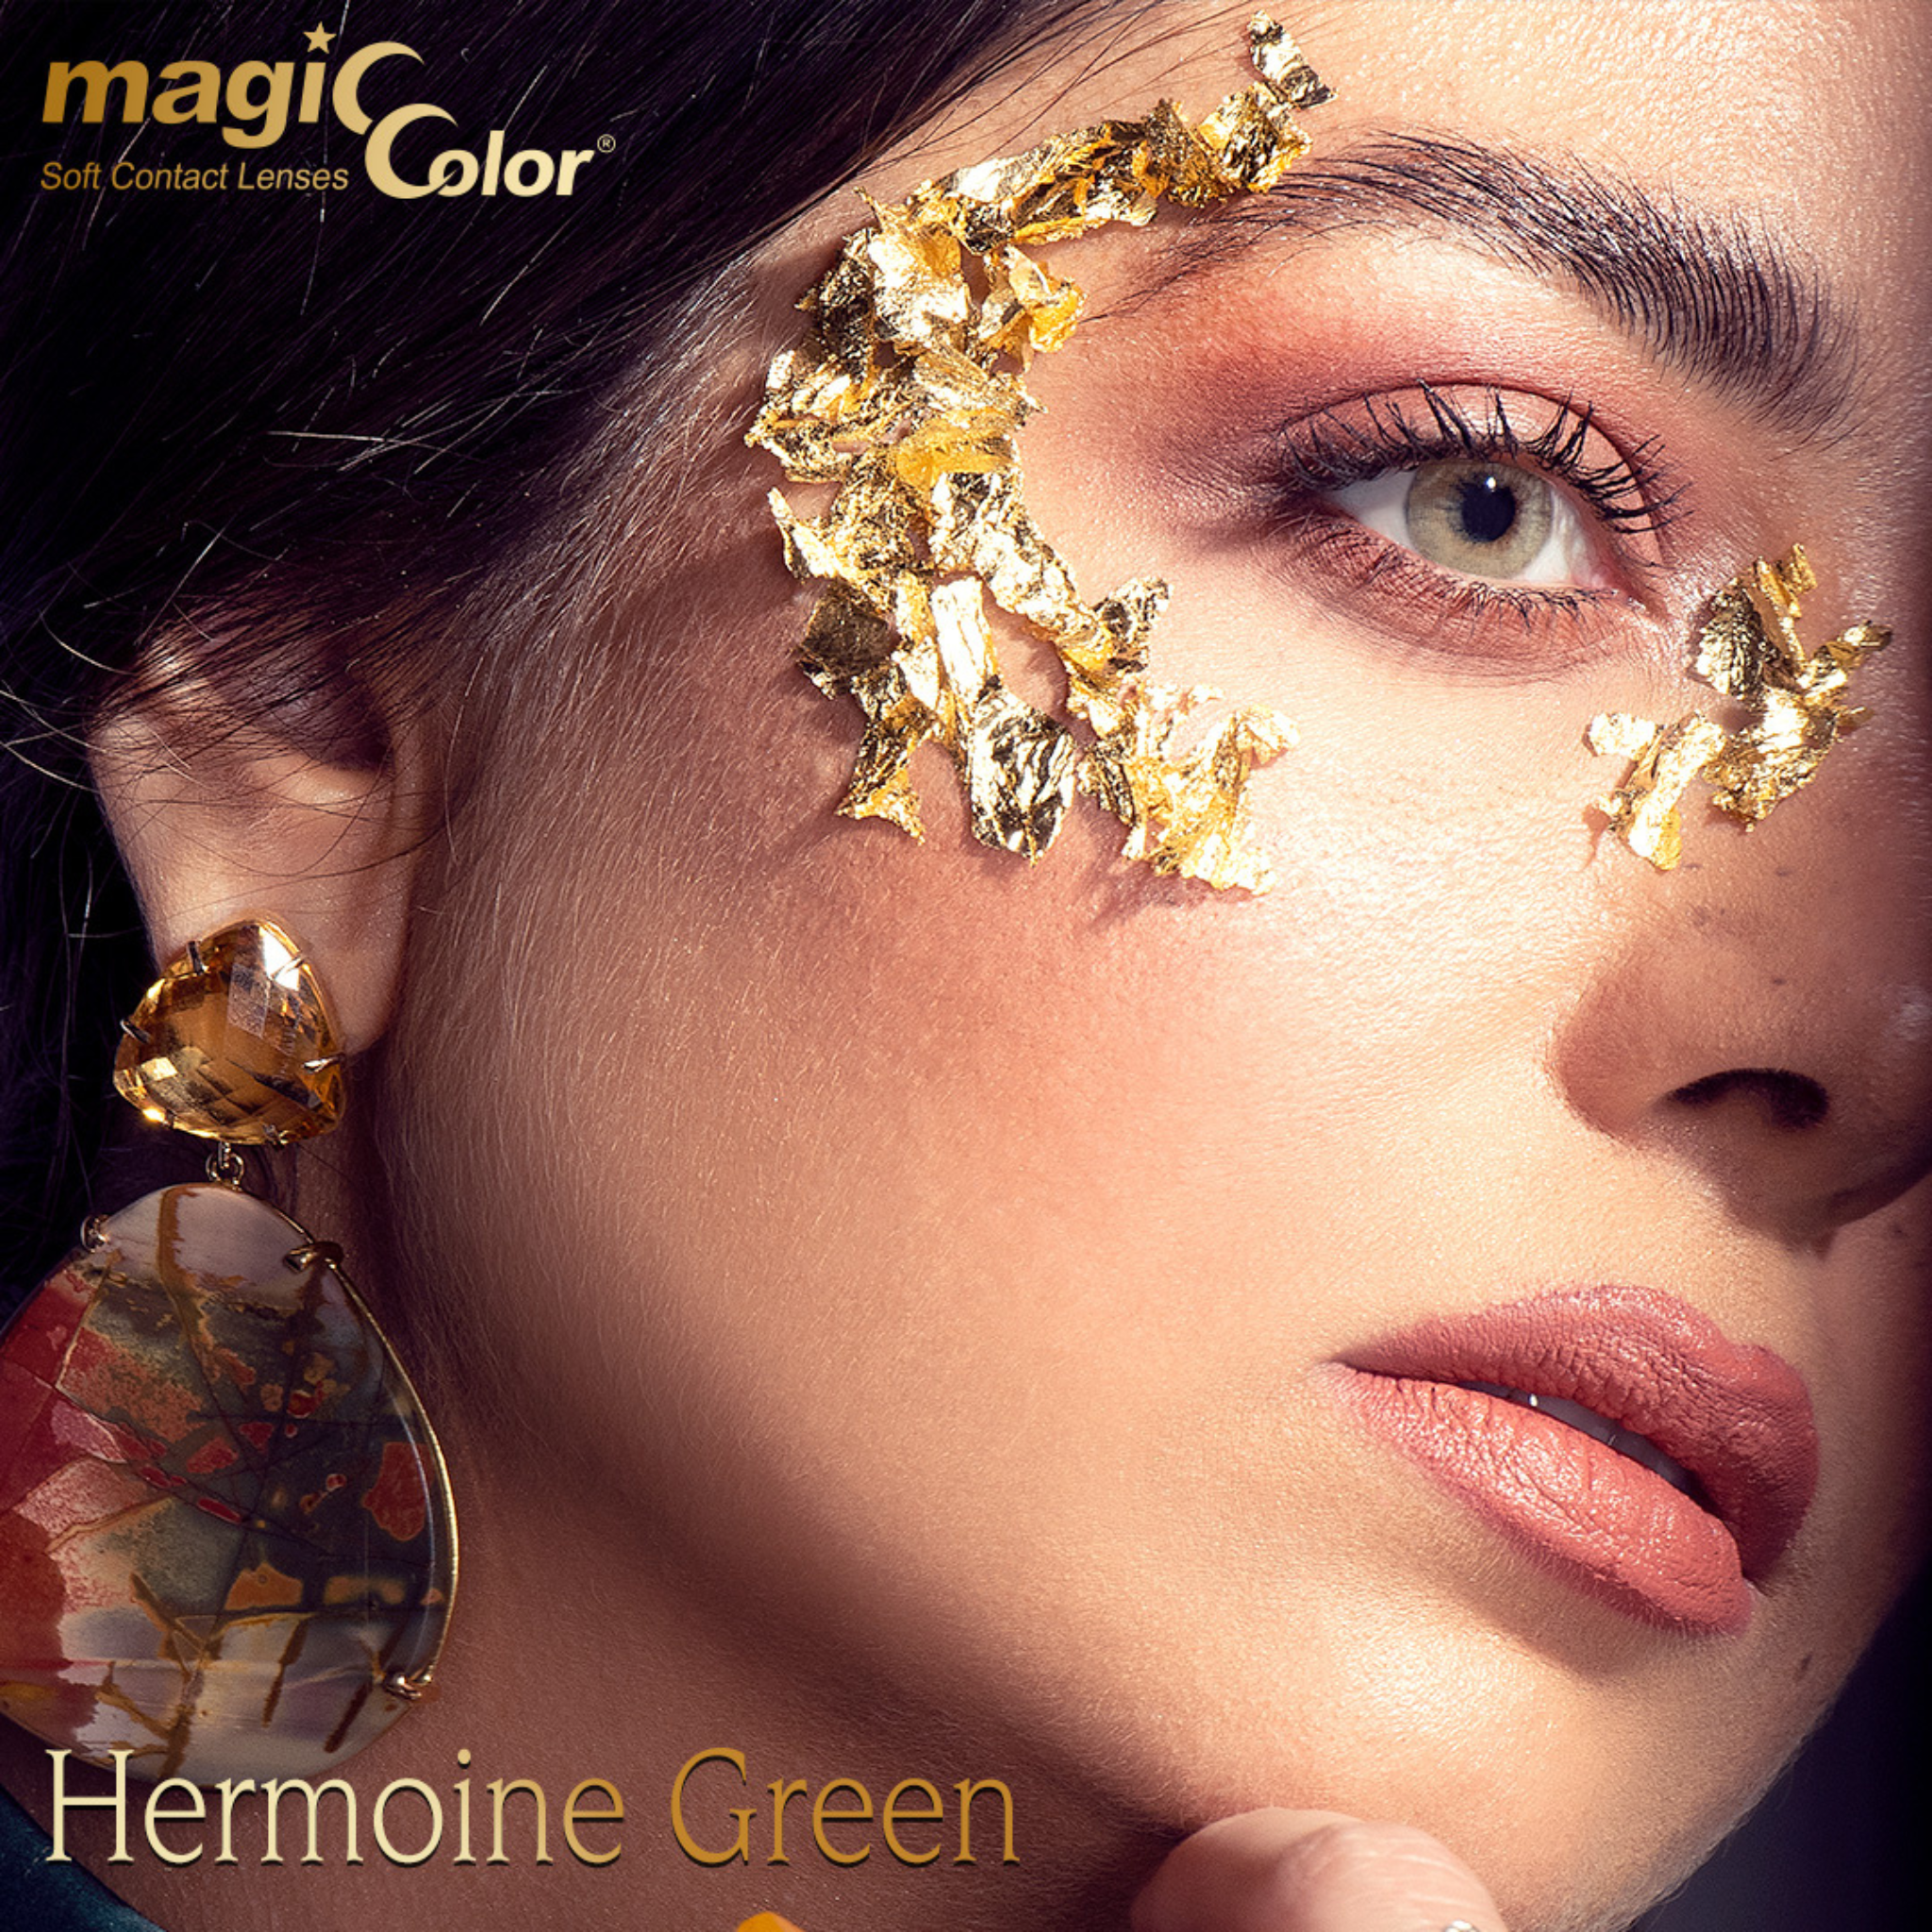 Magic Color: Hermoine green - Monthly - COC Eyewear